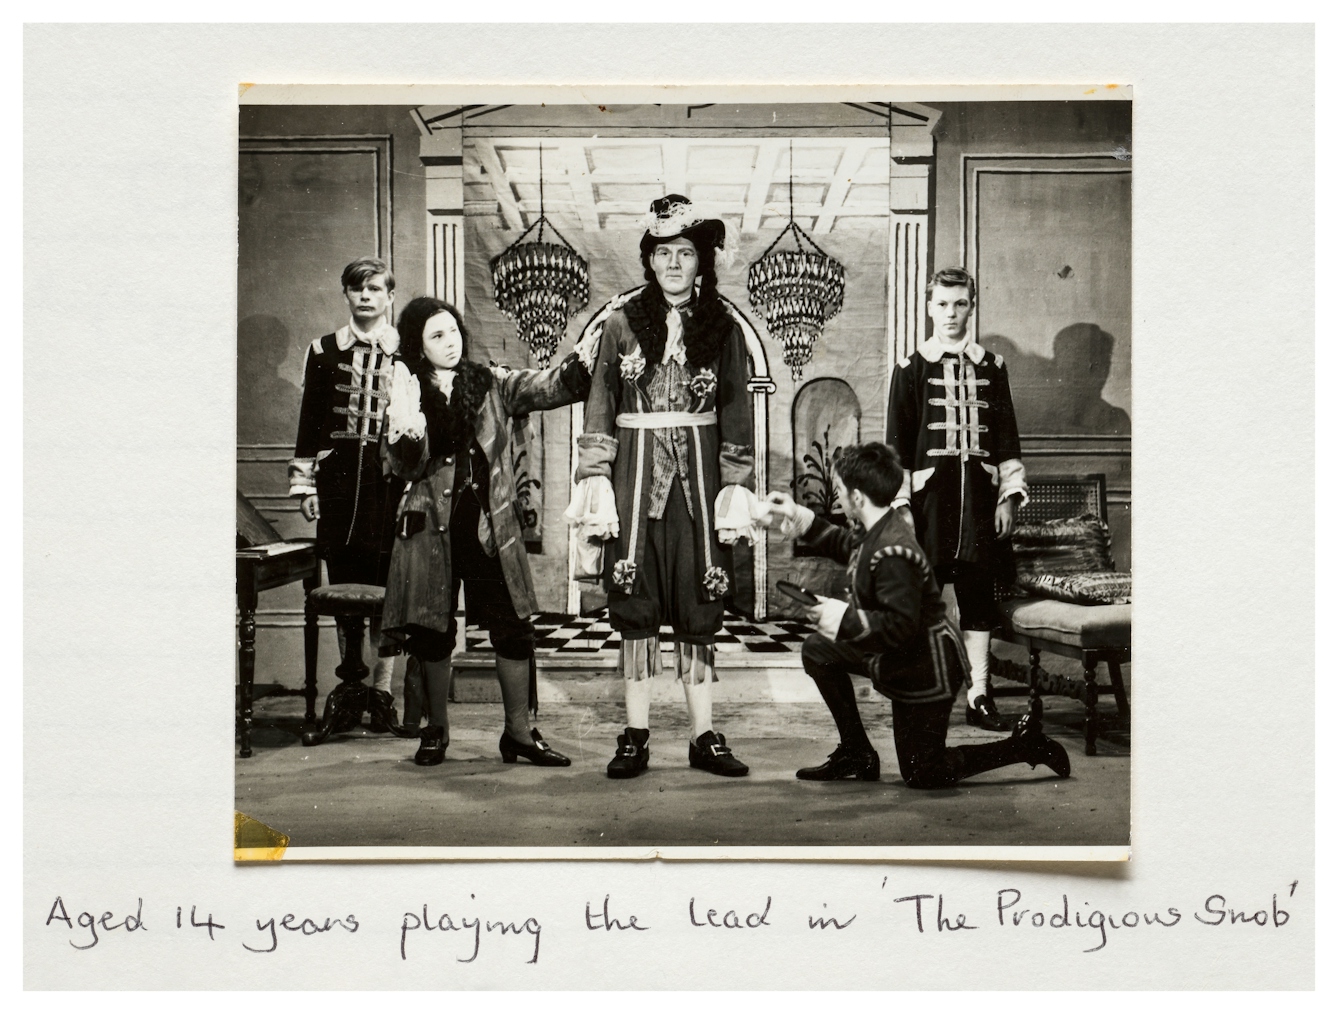 Photograph of a sepia tones photograph from the 1960s stuck into a scrapbook. The photo shows a school production of a play with 5 school children dressed in period costumes on a stage with painted backdrop. In the centre is a tall figure looking straight to camera. Underneath the photograph are the handwritten words '14 years playing the lead in 'The Prodigious Snob'.